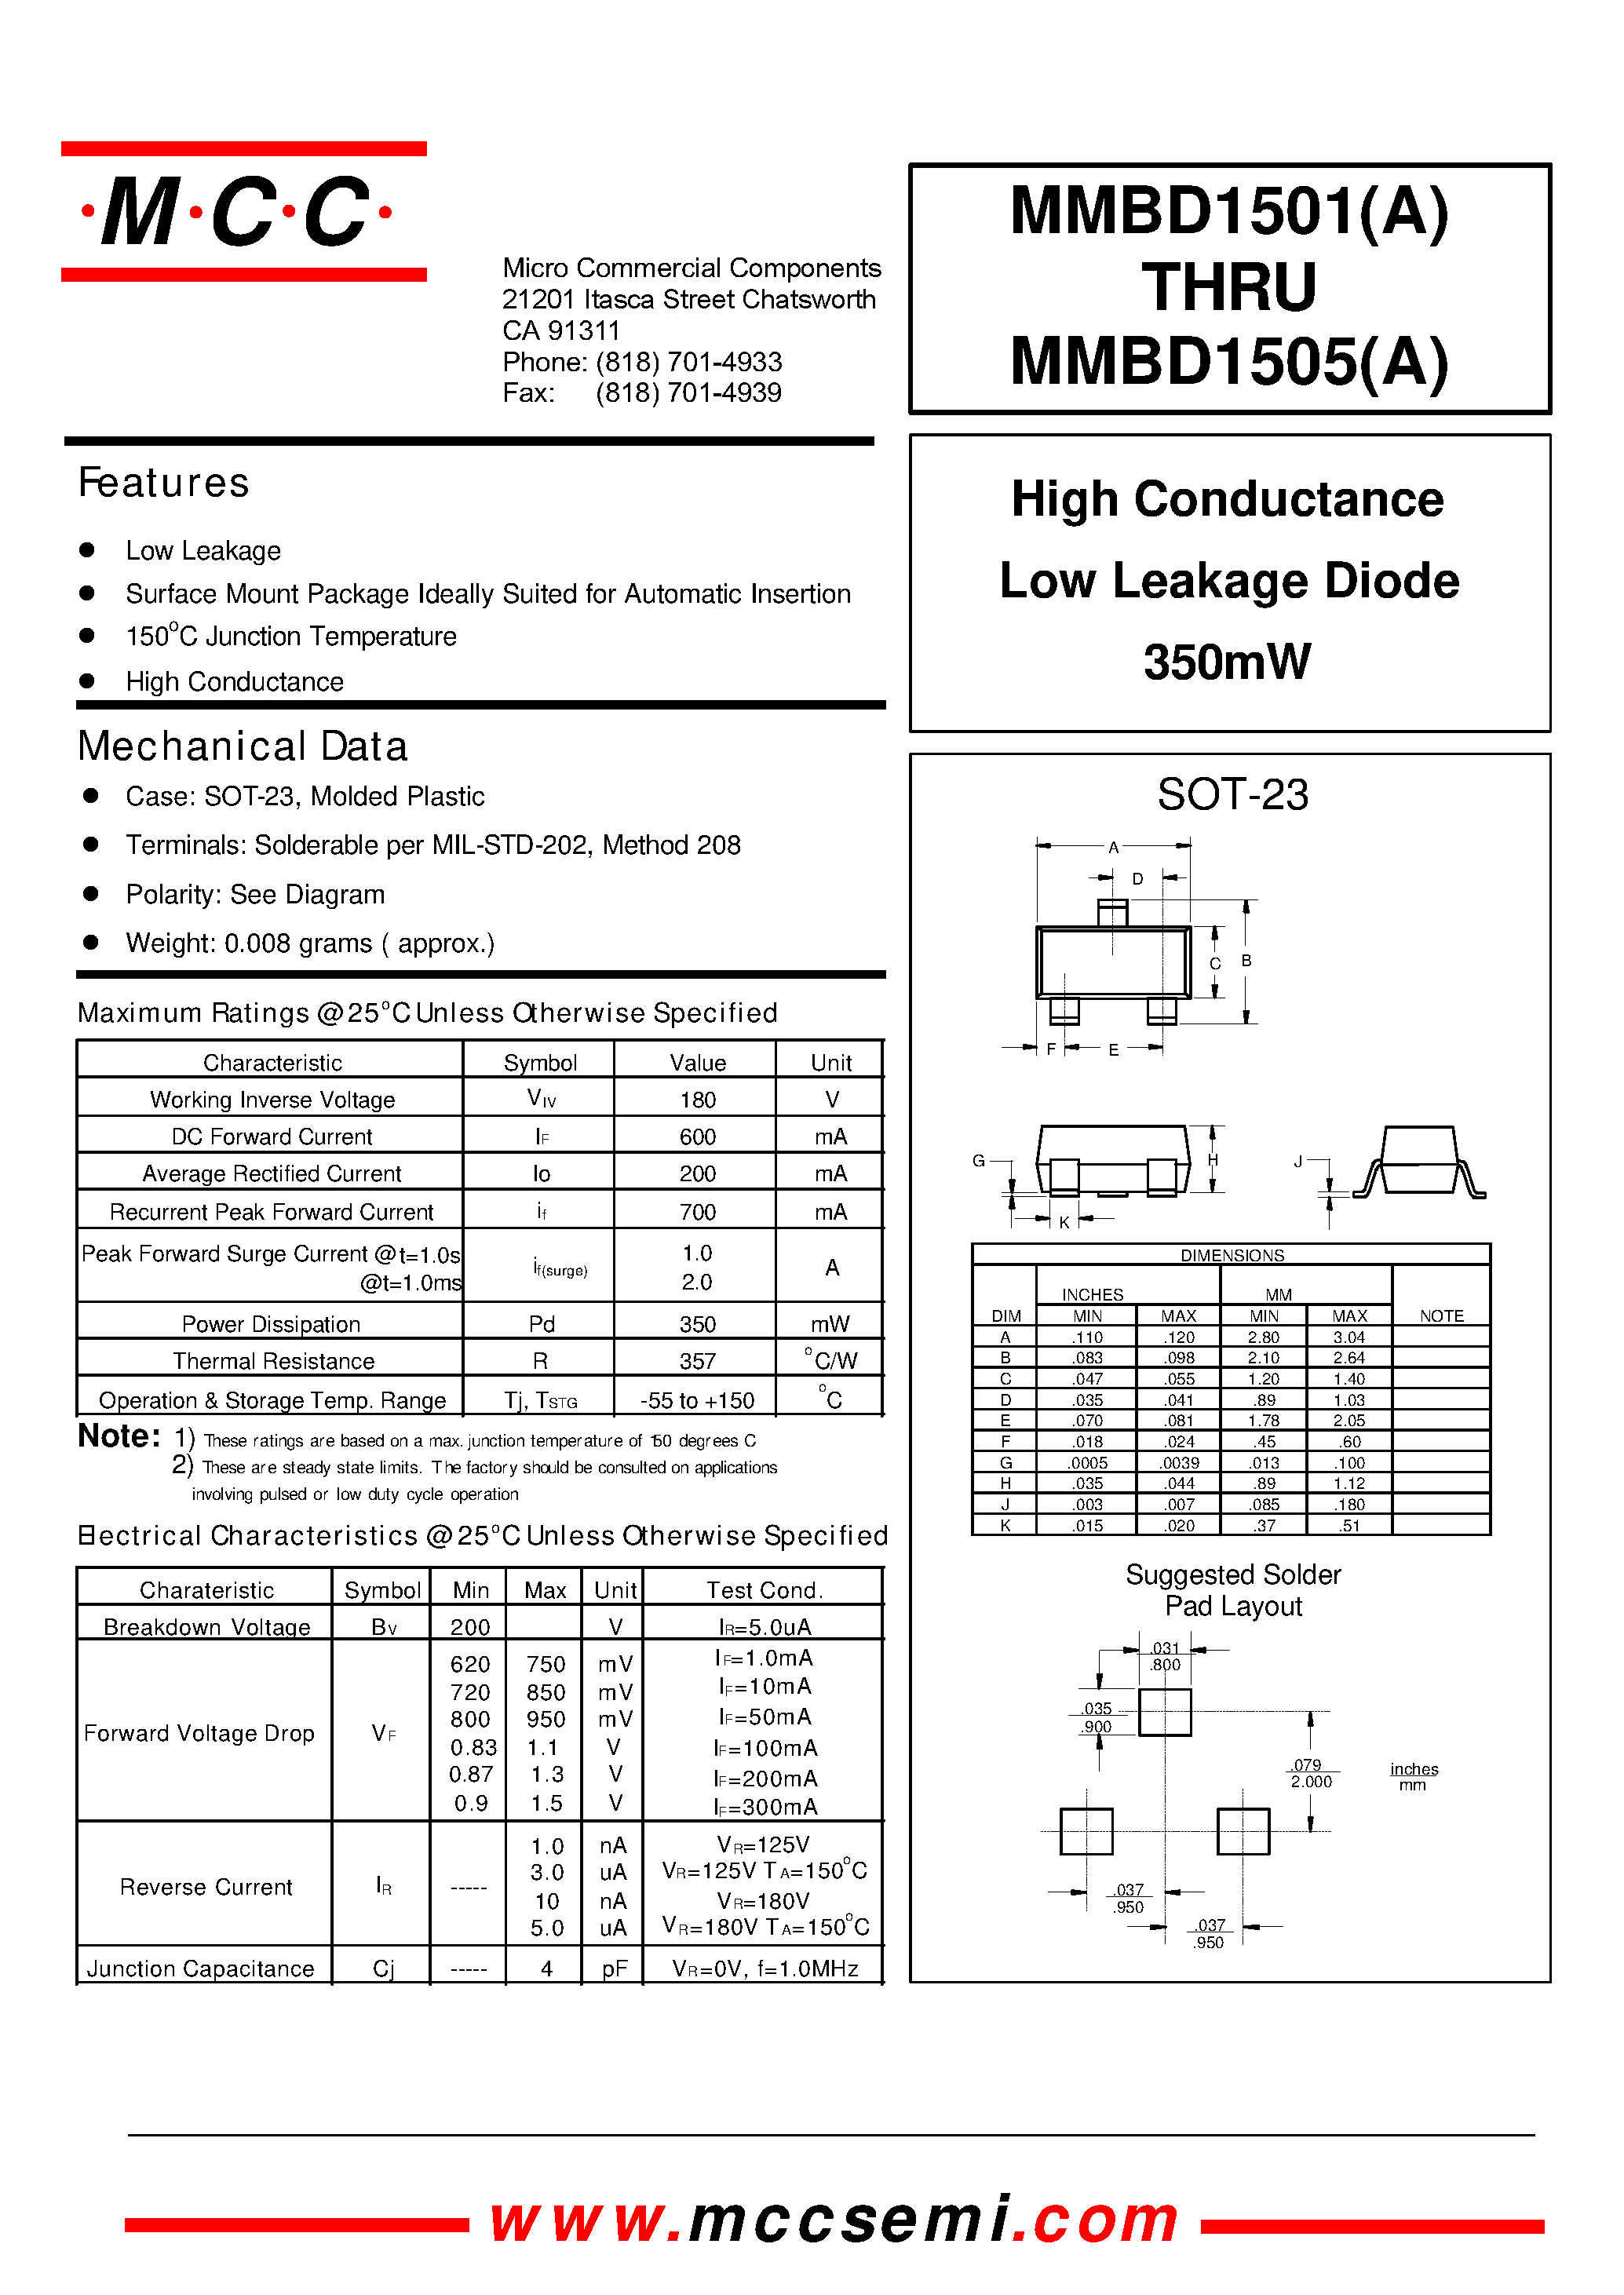 Даташит MMBD1503A - High Conductance Low Leakage Diode 350mW страница 1